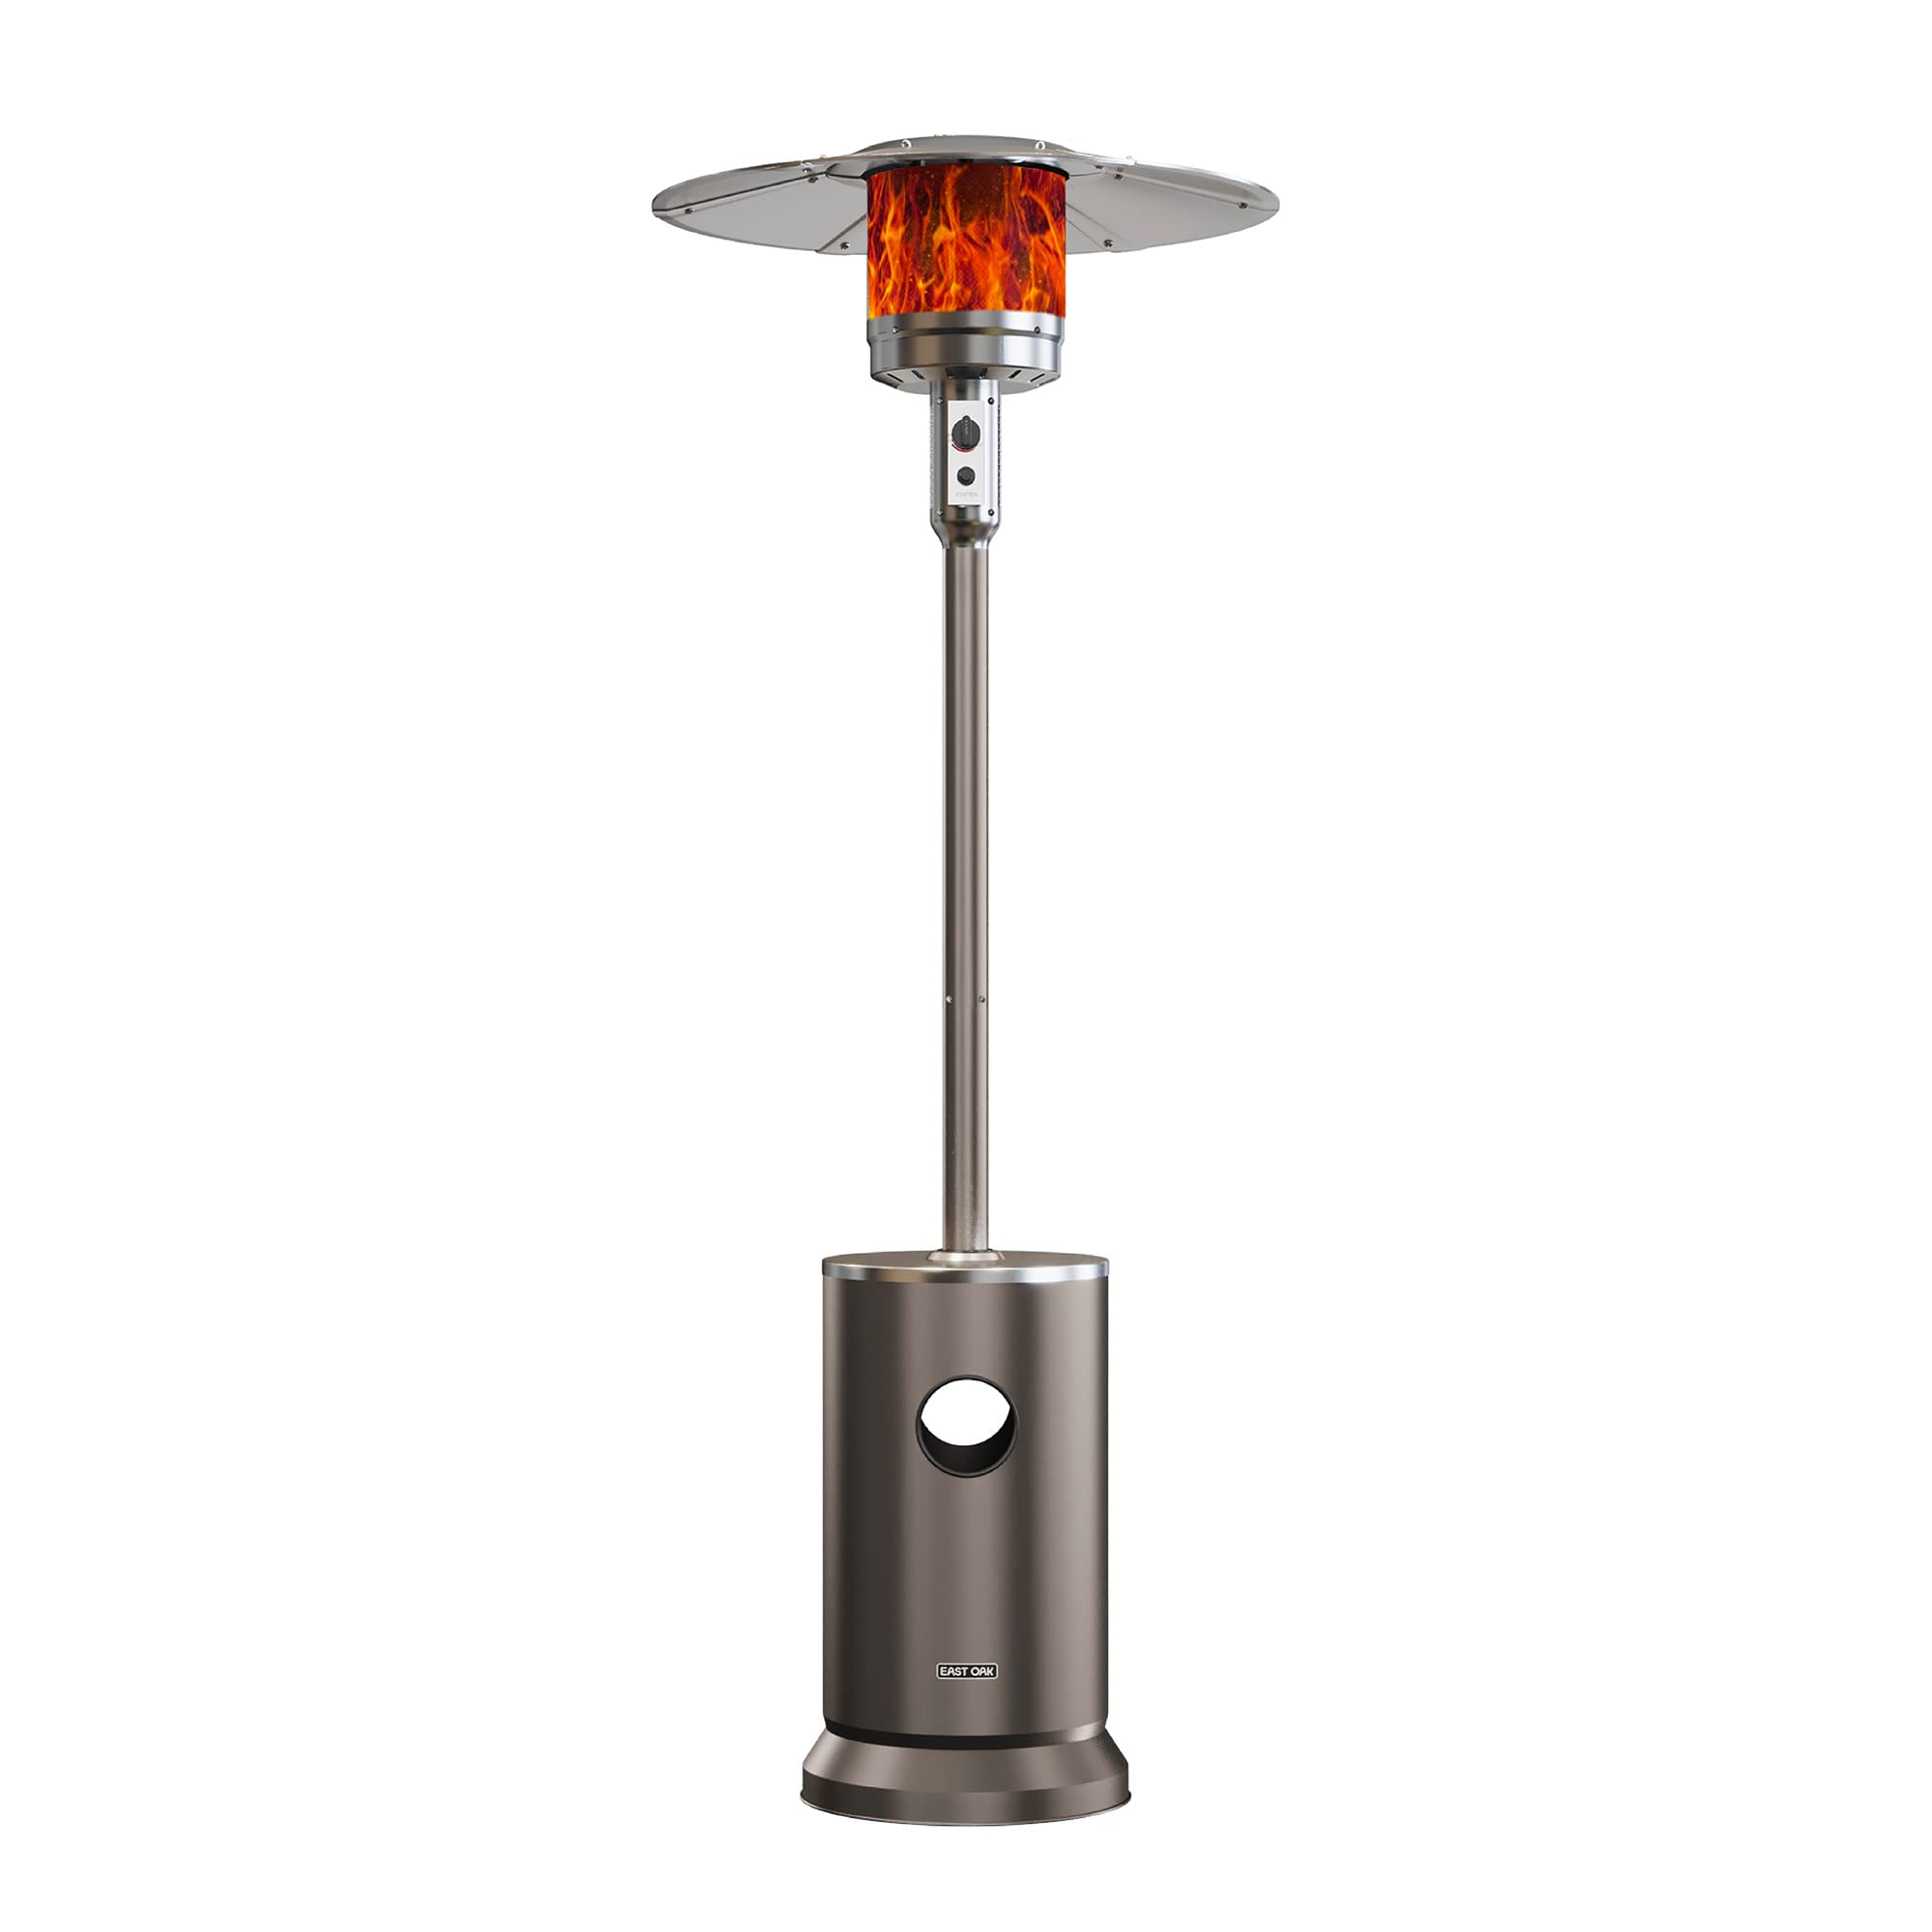 East Oak Patio Heater, East Oak 50,000 Btu Outdoor Patio Heater With Table Design, Stainless Steel Burner, Triple Protection System, Whee